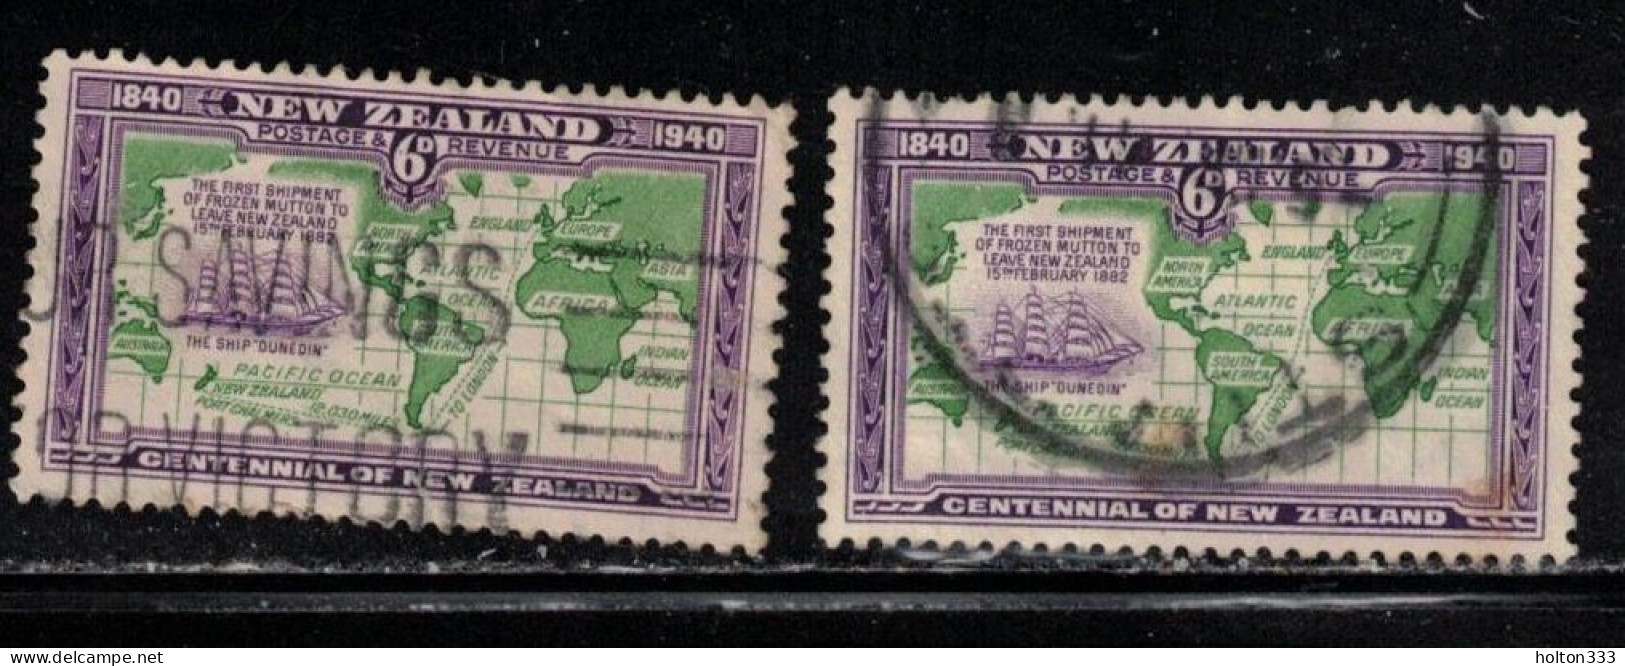 NEW ZEALAND Scott # 237 Used X 2 - Ship & World Map - Used Stamps